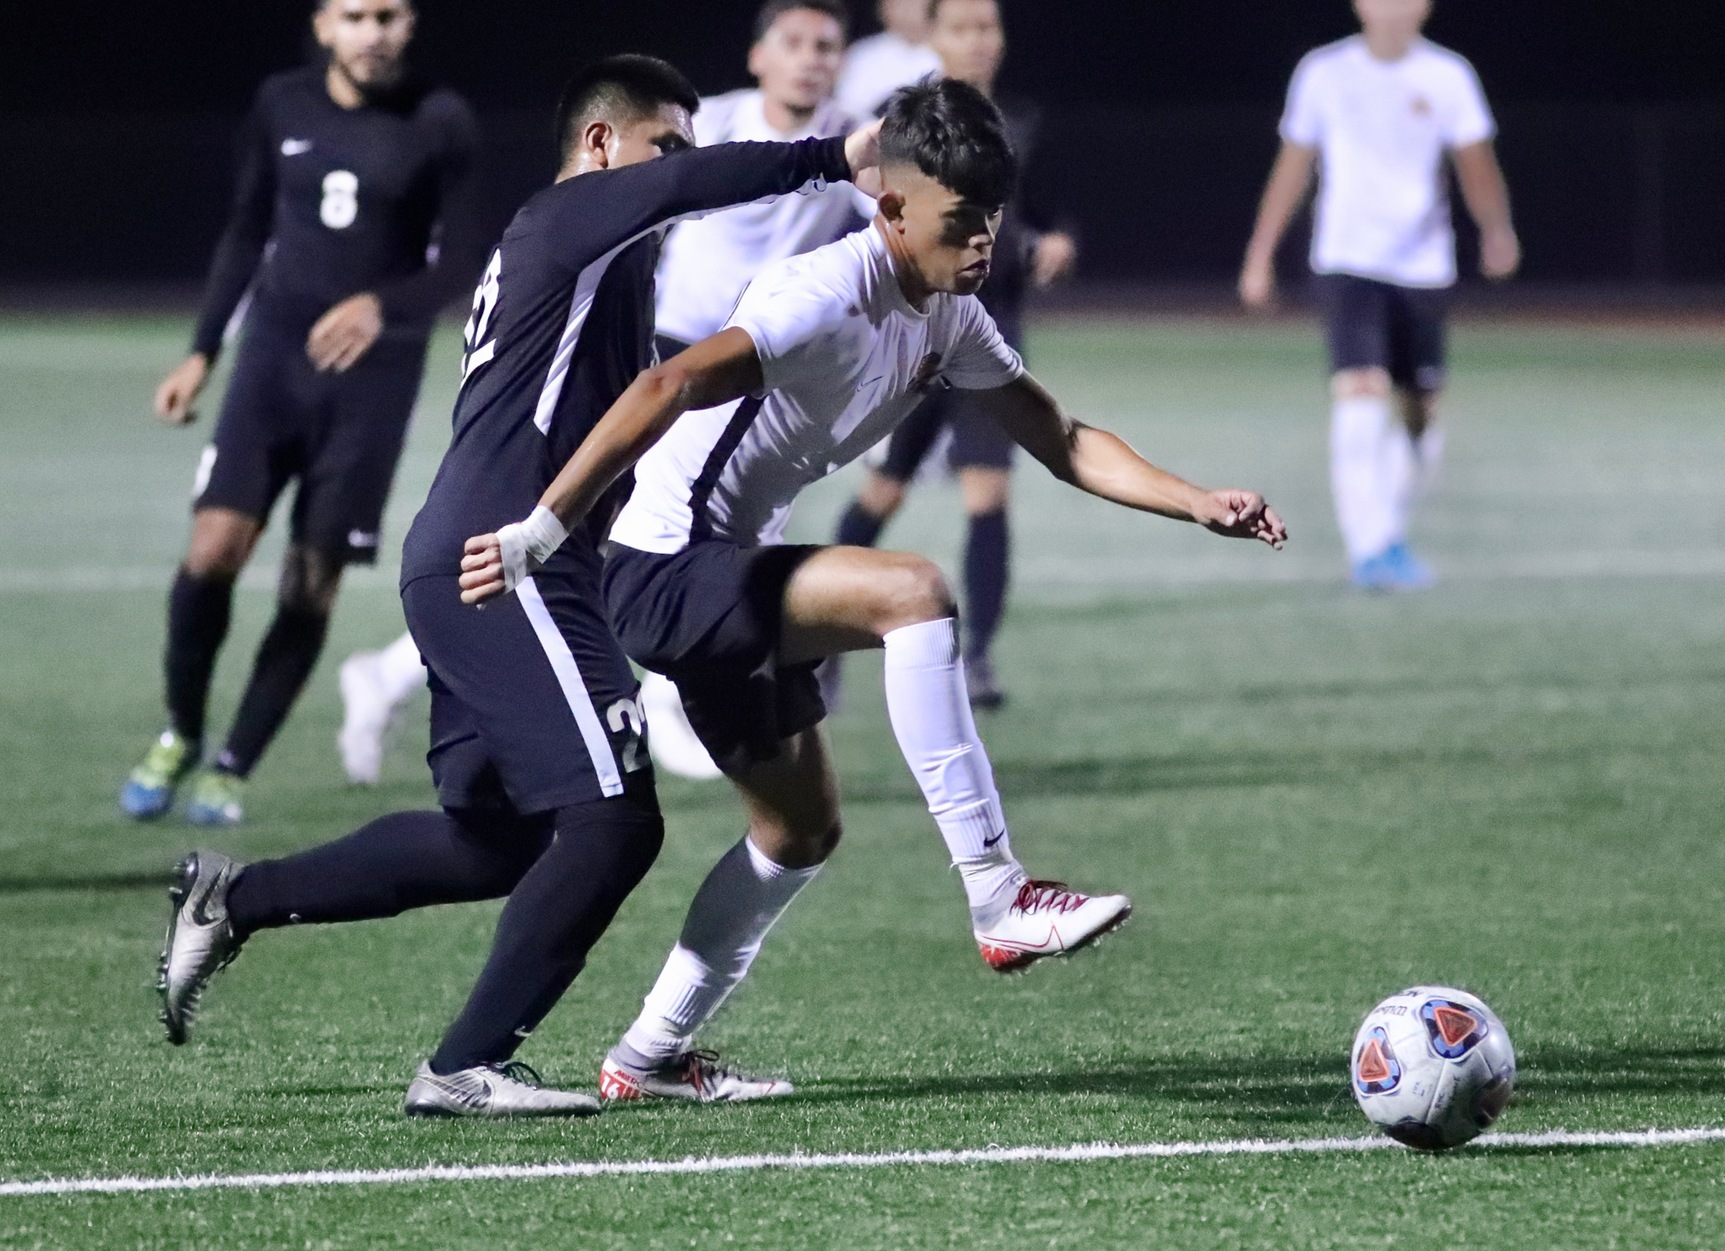 Mario Urbina, the team's leading scorer and an All-SCC 2nd Team selection in 2019, is back for his sophomore season on the PCC men's soccer team in 2021.